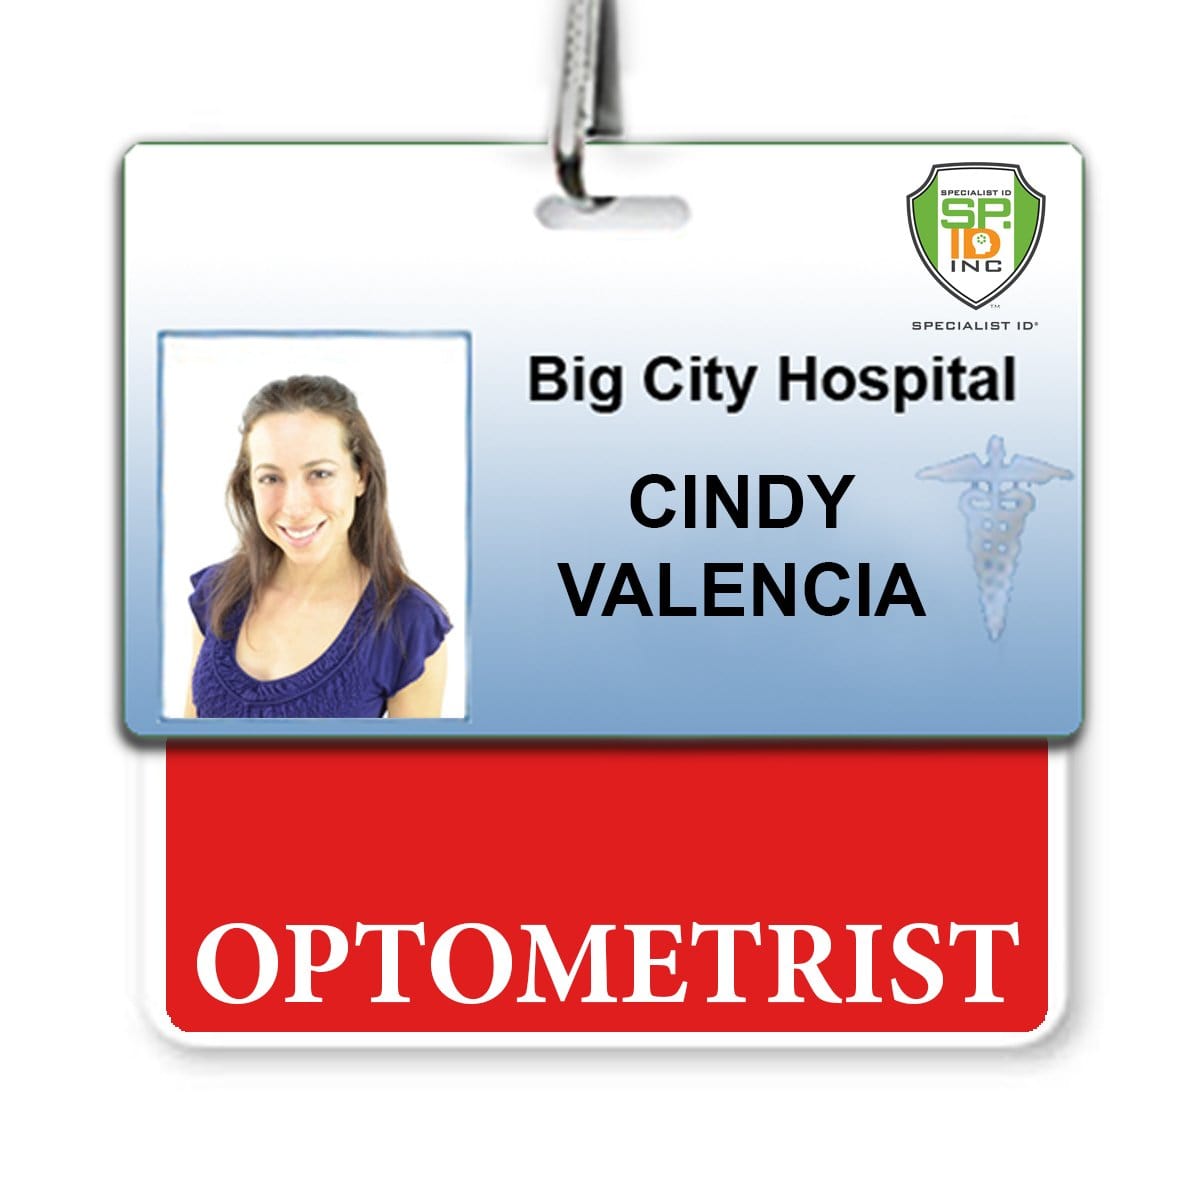 ID badge for Cindy Valencia, an optometrist at Big City Hospital. The badge displays her photo, the hospital logo, a specialist ID sticker, and features a red border to ensure it stands out. Additionally, it includes an "Optometrist" Horizontal Badge Buddy with Red Border for easy identification and added functionality.